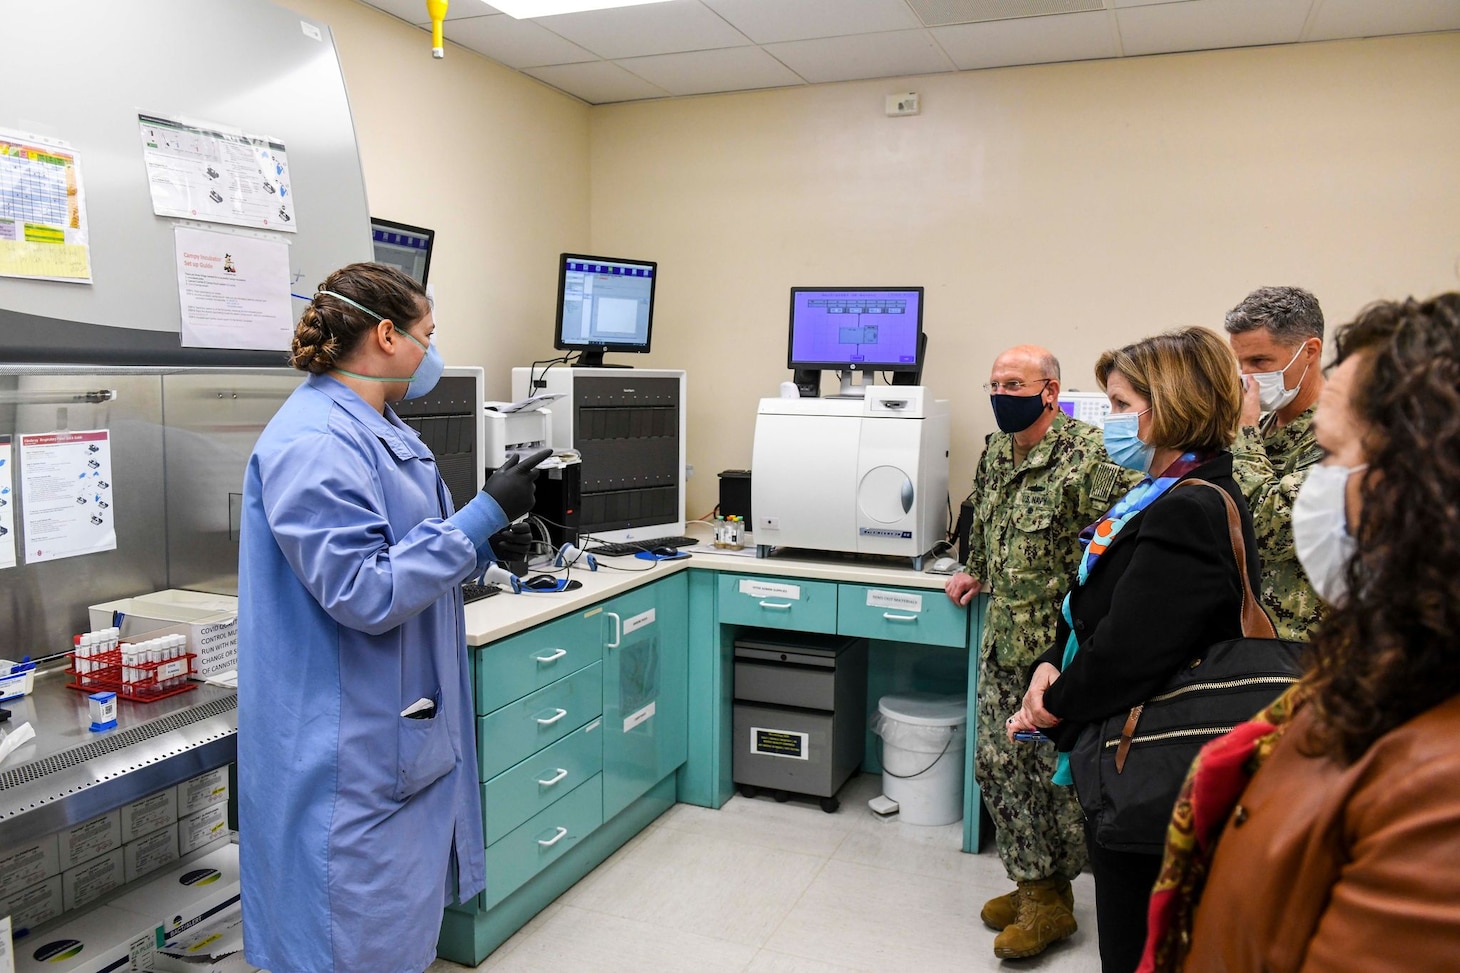 NAVAL SUPPORT ACTIVITY NAPLES, Italy (Jan. 11, 2021) Chief of Naval Operations Adm. Mike Gilday, center, and his wife, Mrs. Linda Gilday, right center, observe as Hospital Corpsman 2nd Class Allison Jones, assigned to the laboratory staff at U.S. Naval Hospital Naples, Italy, demonstrates how a COVID-19 polymerase chain reaction (PCR) test is processed at the hospital’s laboratory at Naval Support Activity Naples, Italy, Jan. 11, 2021. USNH Naples, the largest naval hospital in Europe, serves a diverse population of over 9,800 beneficiaries. Over 500 staff members at the main hospital, branch health clinic, and Navy Liaison Detachment in Landstuhl, Germany work tirelessly to keep warfighters in the fight and provide care for their families. (U.S. Navy photo by Mass Communication Specialist 3rd Class Trey Fowler/ Released)